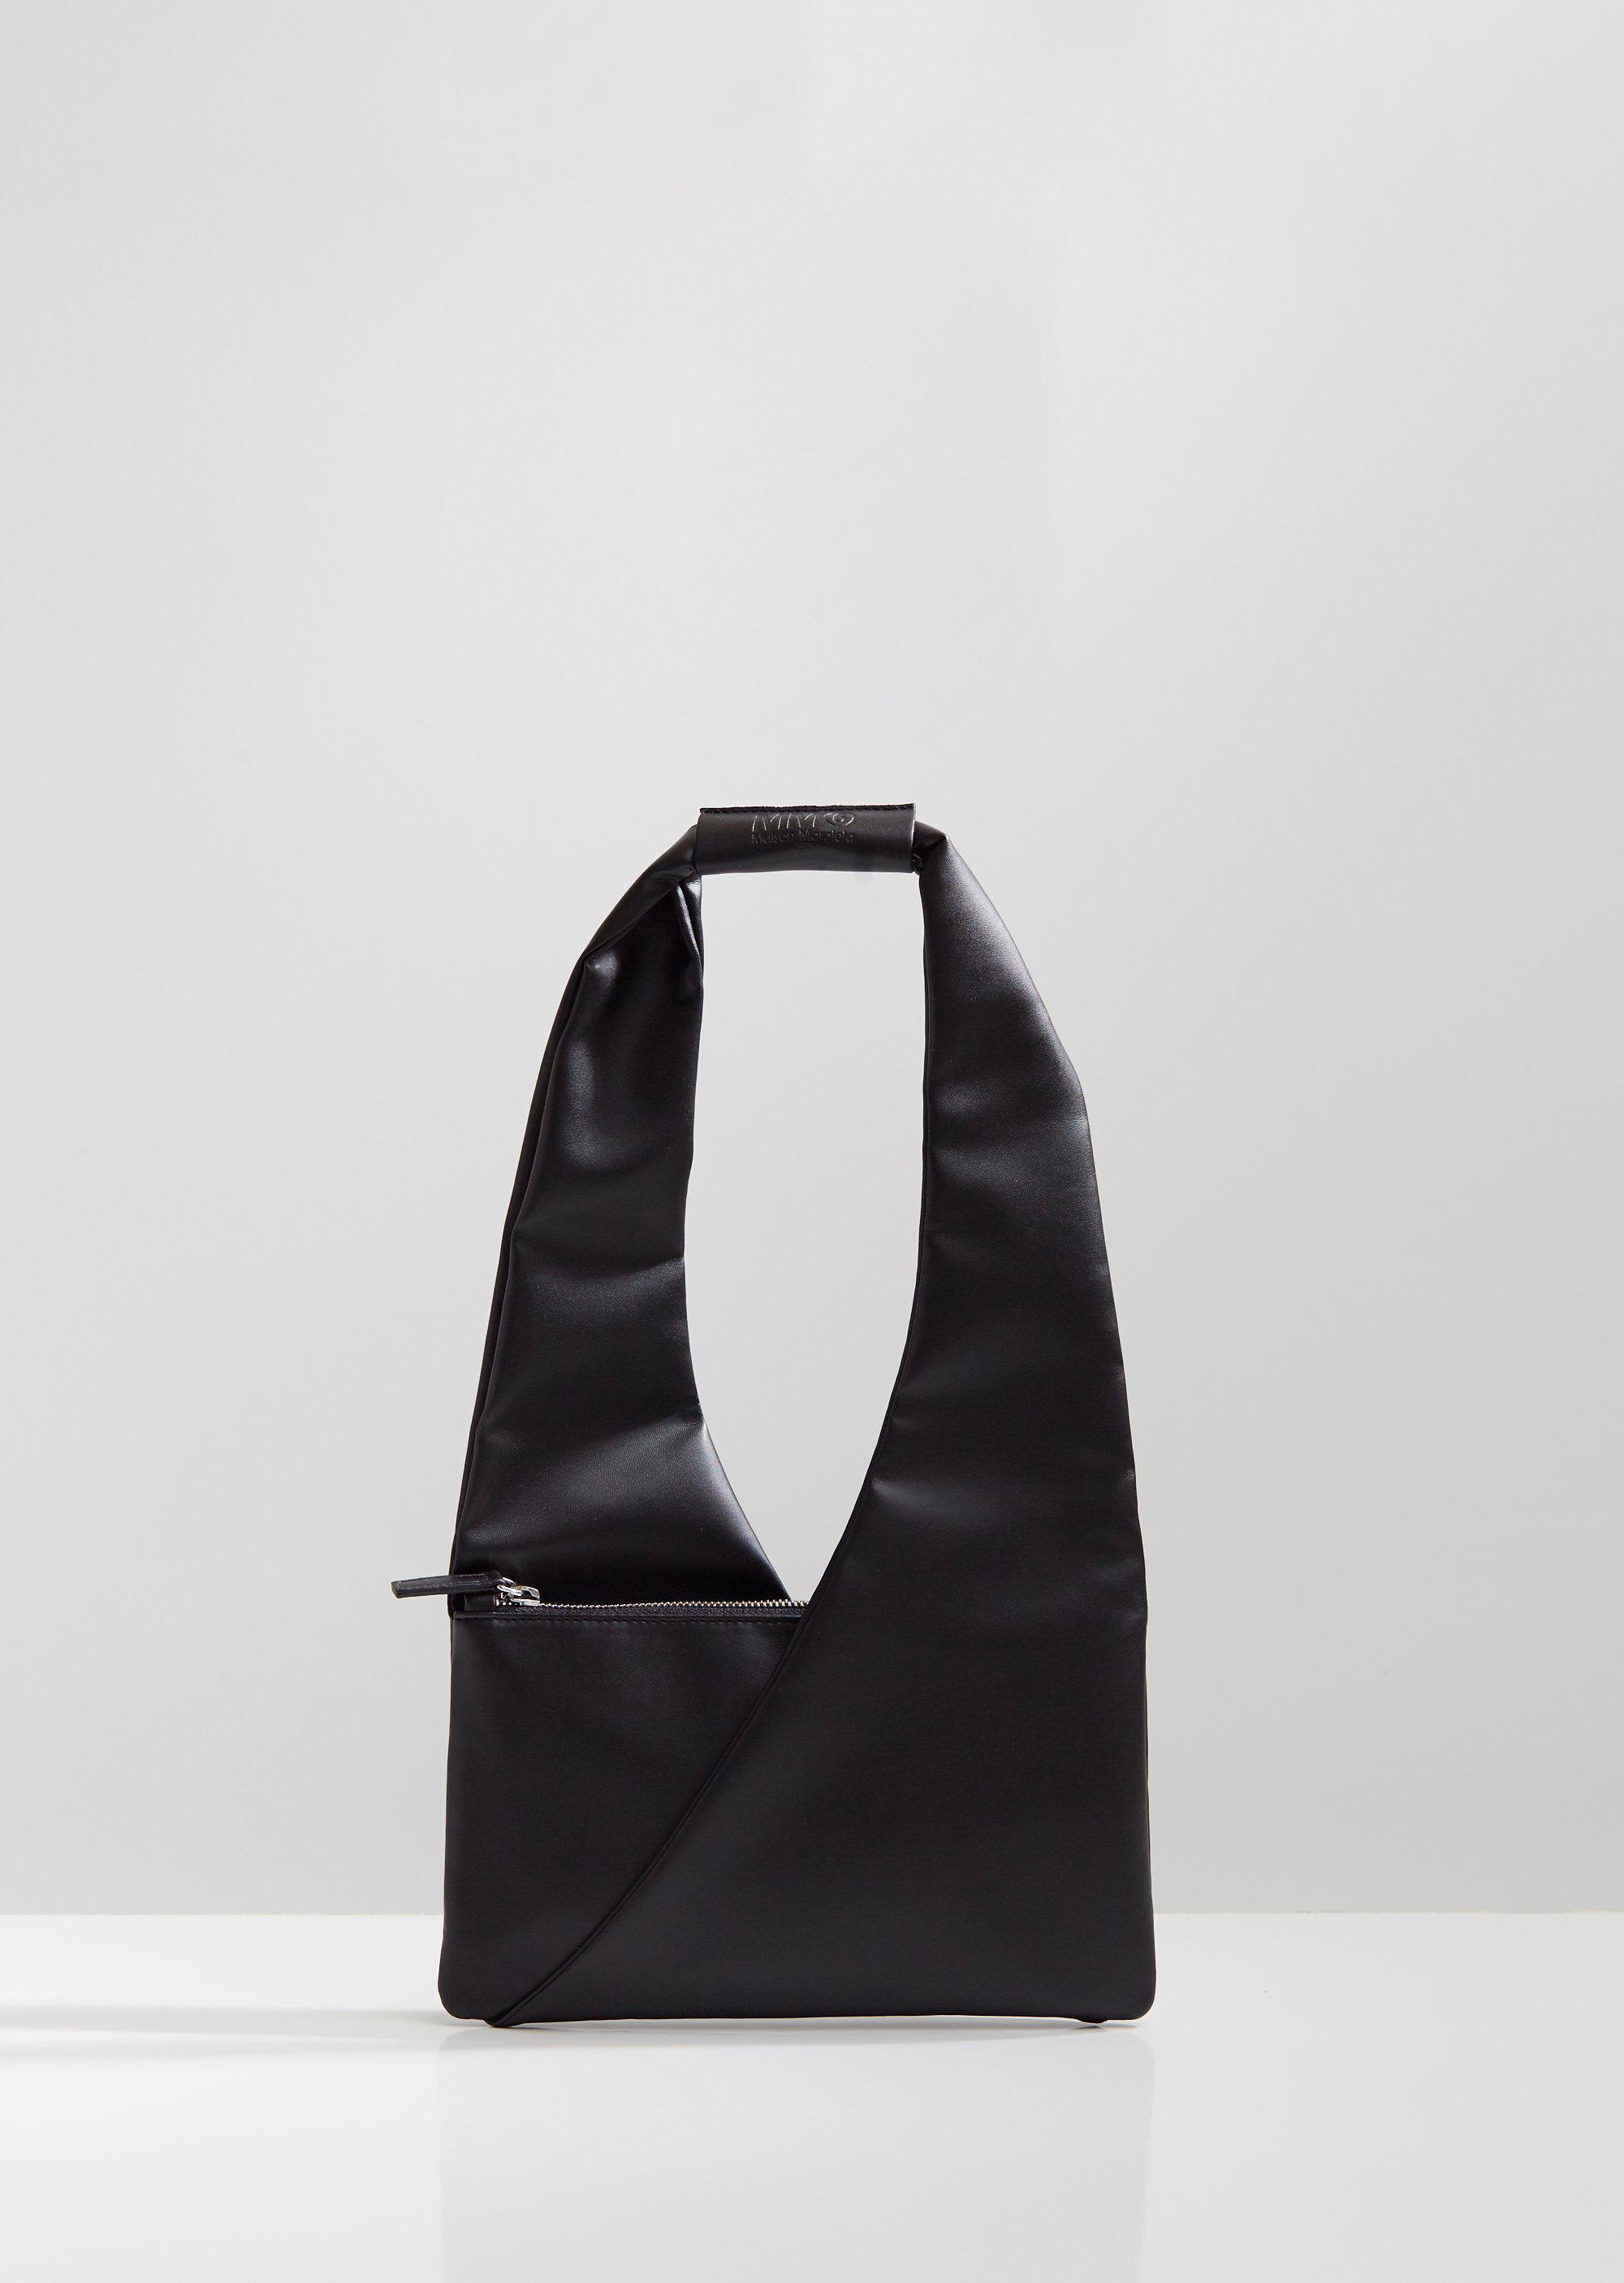 MM6 by Maison Martin Margiela New Mini Leather Triangle Bag in Black - Lyst